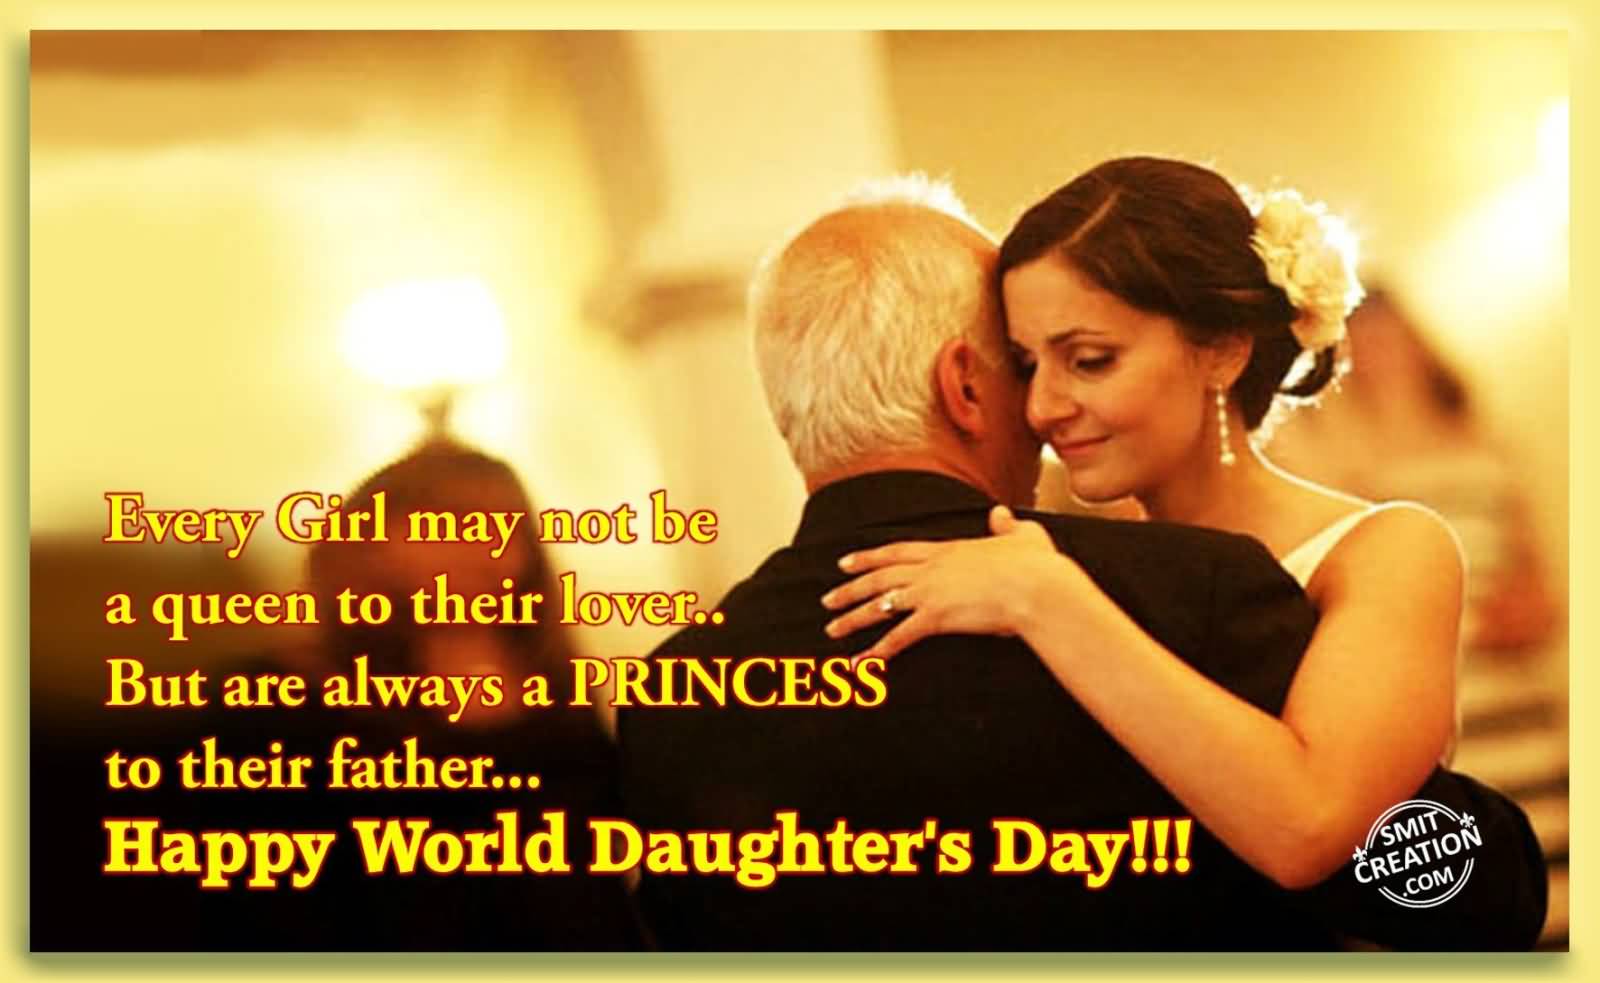 Happy World Daughter s Day